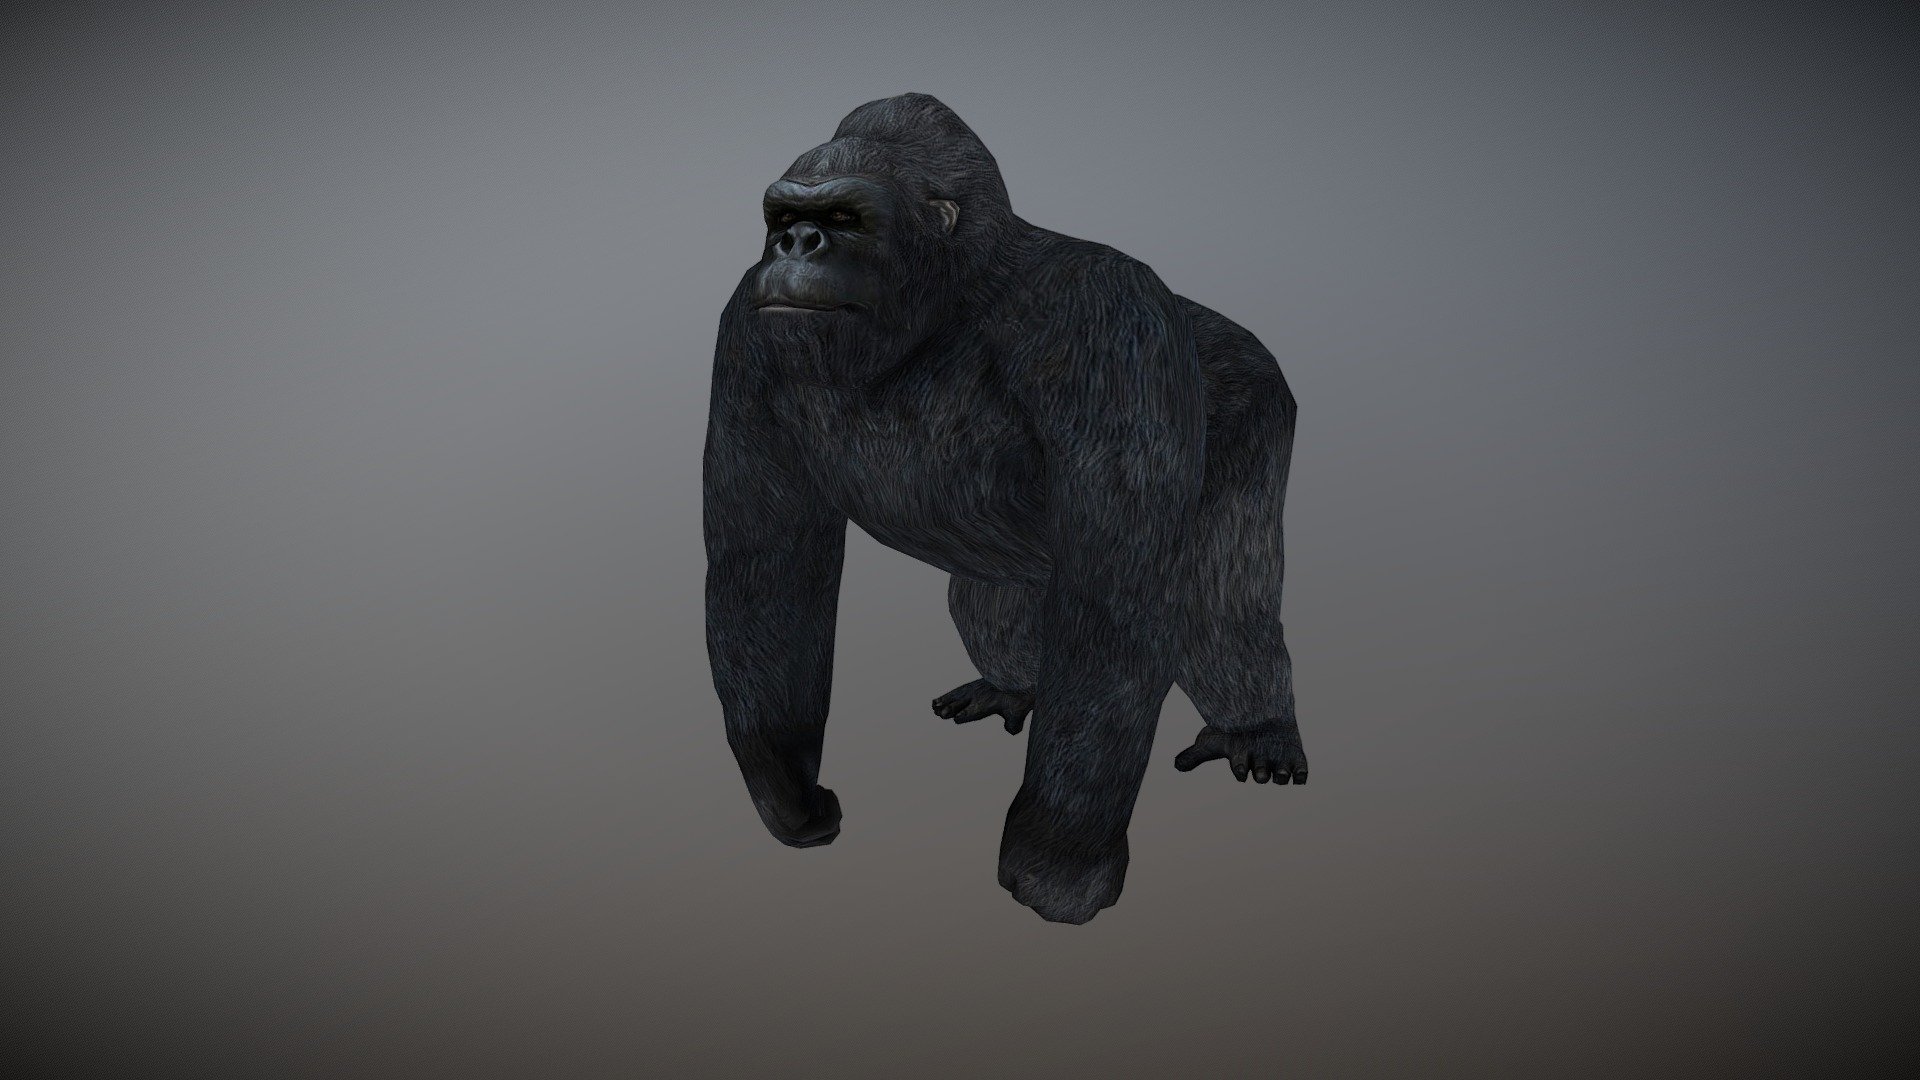 WATCH = https://youtu.be/lD20TD689BU

3D Gorilla Realistic Character with Animations

PACKAGE INCLUDE


High quality polygonal model, correctly scaled for an accurate representation of the original object.
Model is built to real-world scale.
Many different format like blender, fbx, obj, iclone, dae
No additional plugin is needed to open the model
Separate Loopable Animations
3d print ready in different poses
Ready for animation
High Quality materials and textures
Triangles = 5570
Vertices = 2835
Edges = 8388
Faces = 5570

ANIMATIONS


Idle
Walk
Run
Jump
Howl
Pound Chest Start
Pound Chest
Pound Chest End
Attack

3D PRINT POSES ( STL  OBJ )


Idle
Idle side look
Stand
Walk
Jump
Howl
Attack
Down
 - Gorilla Animated - Buy Royalty Free 3D model by Bilal Creation Production (@bilalcreation) 3d model